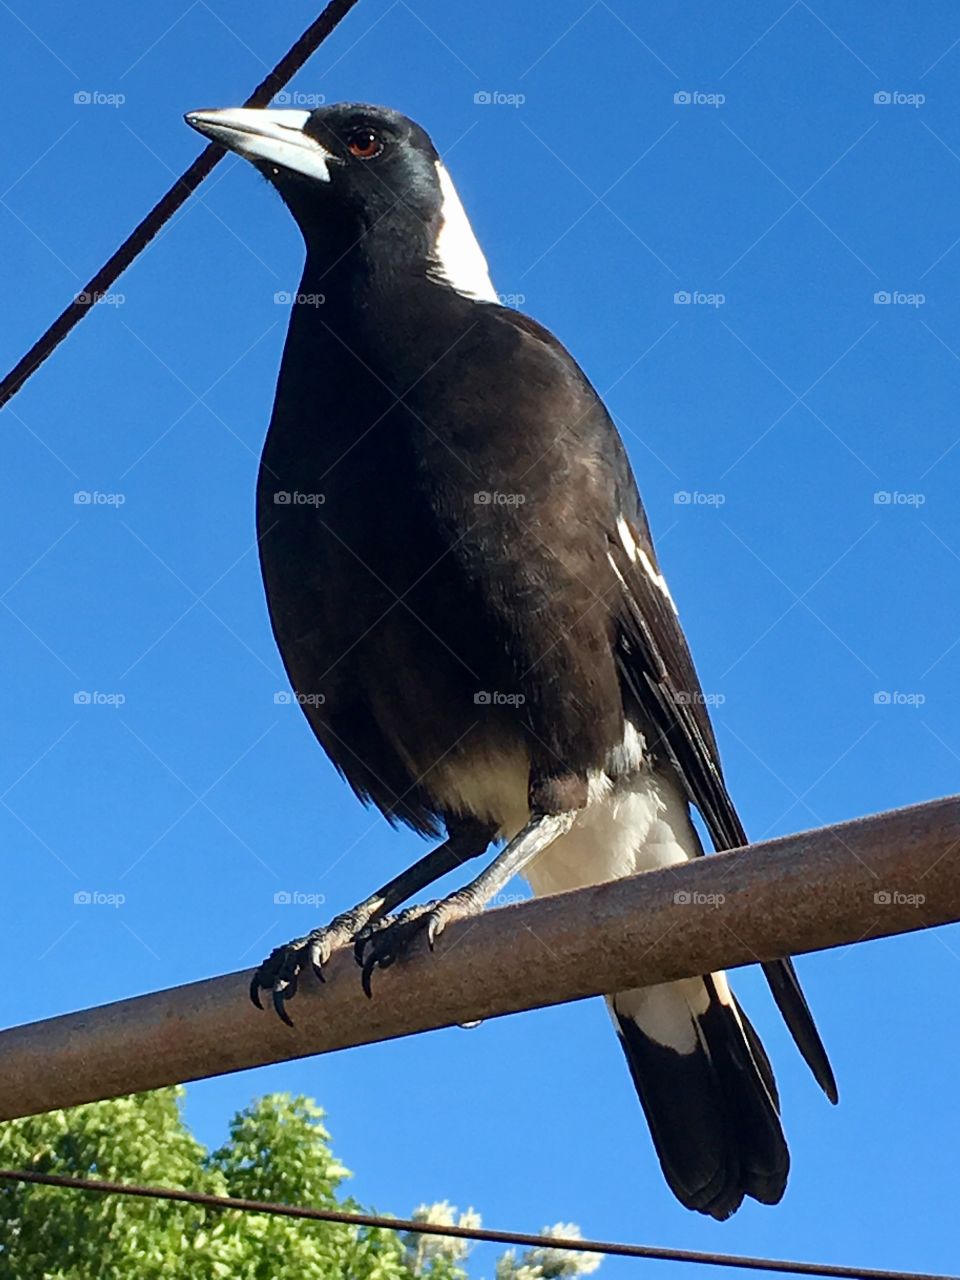 Wild magpie bird perched high on metal pole closeup with vivid blue sky